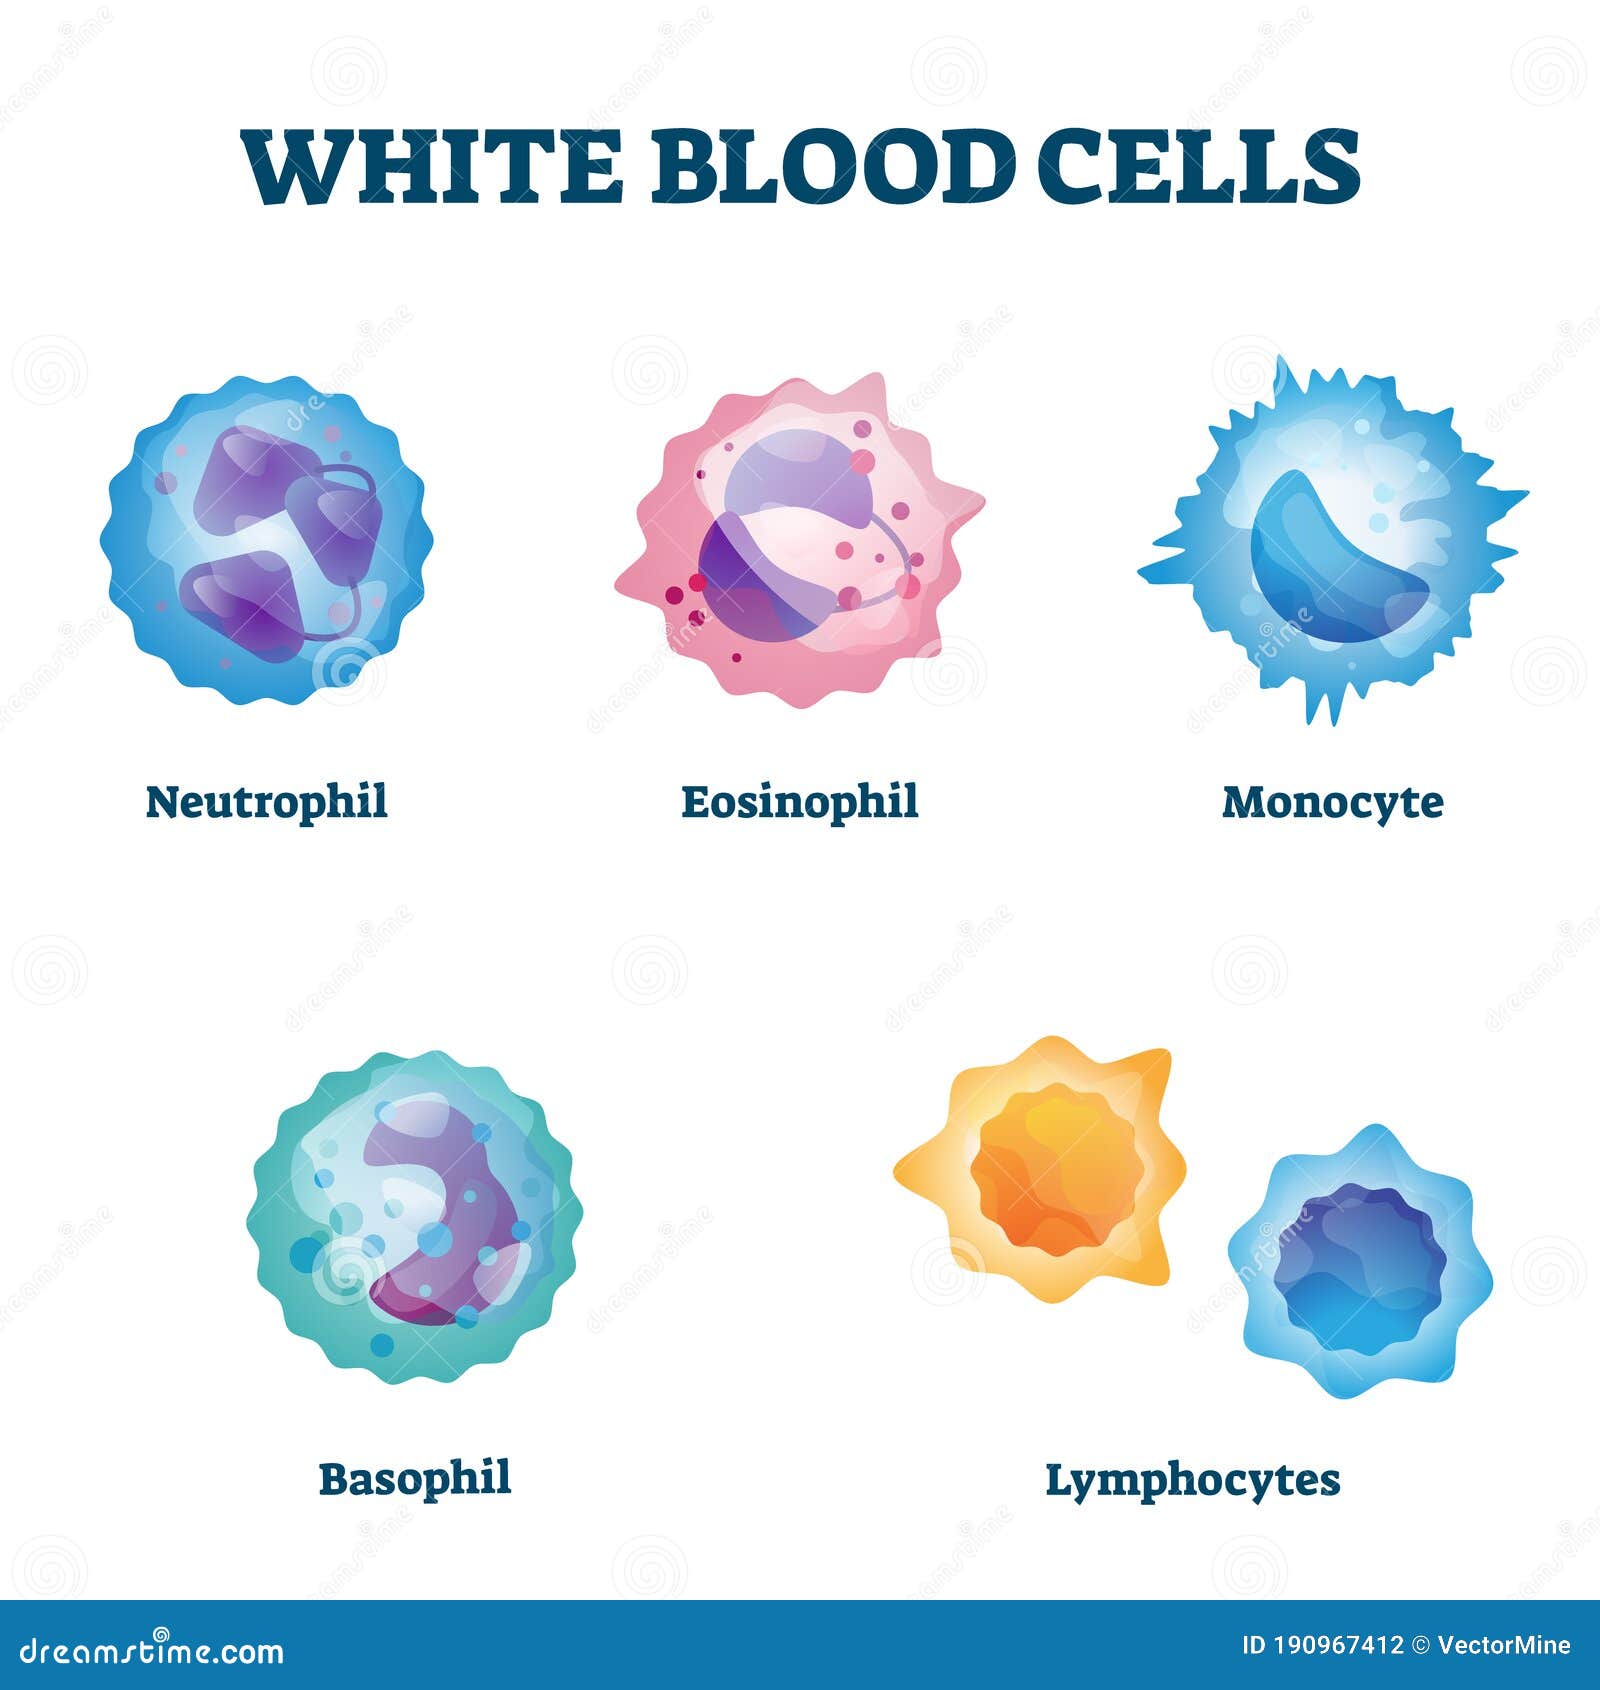 White Blood Cell Chart